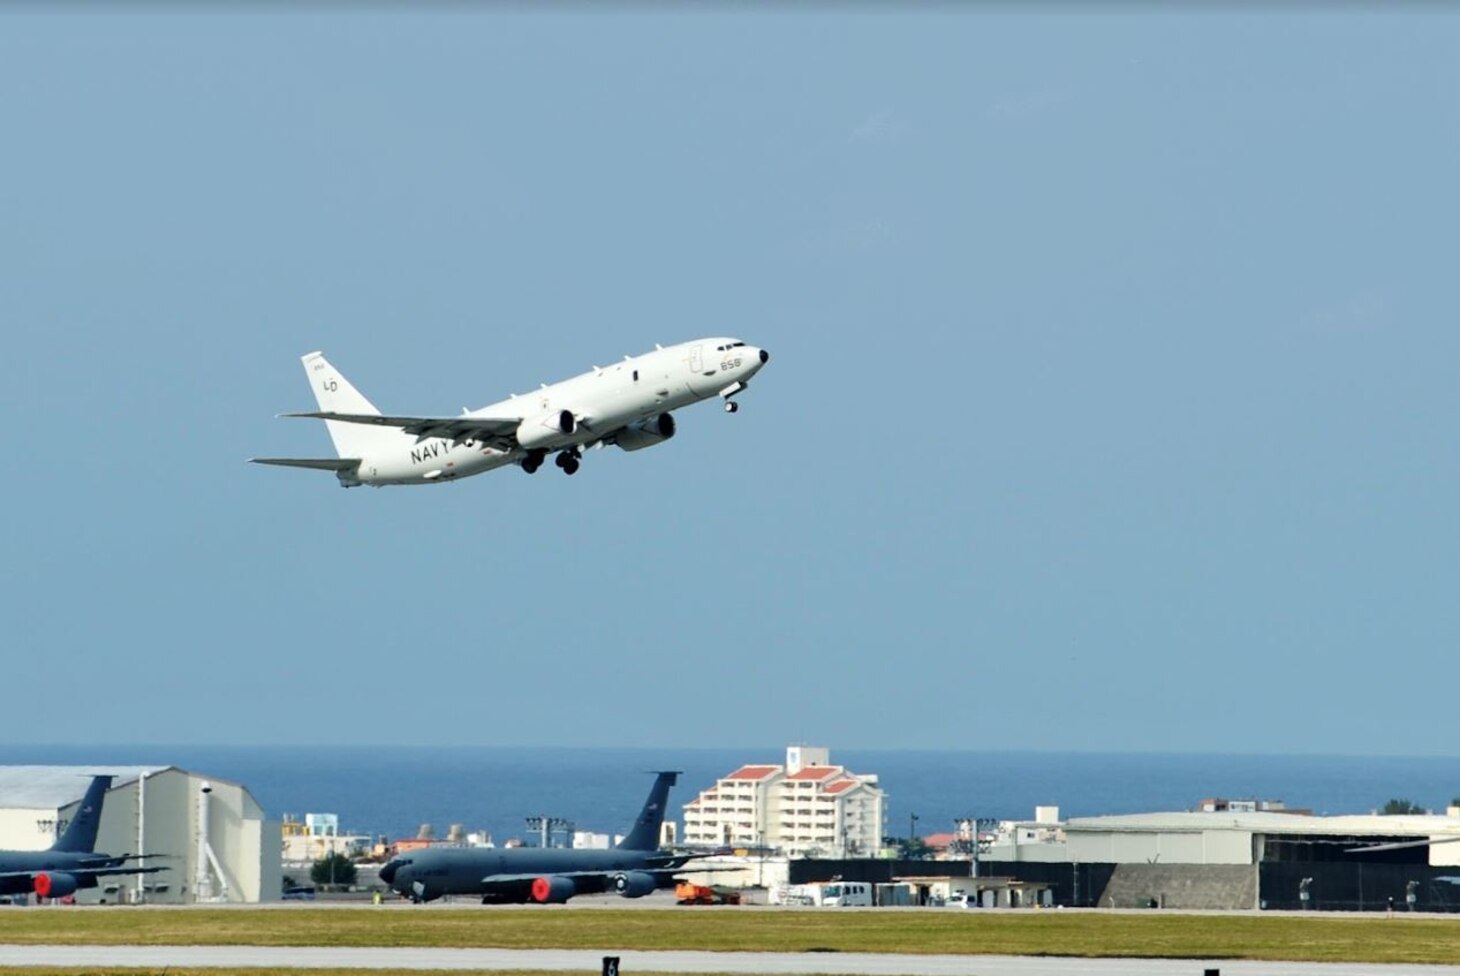 A U.S. Navy P-8A Poseidon from the "Red Lancers" of Patrol Squadron (VP) 10 takes off from Kadena Air Base, March 3. The Red Lancers are based in Jacksonville, Florida, and are currently operating from Kadena Air Base in Okinawa, Japan. The squadron conducts maritime patrol and reconnaissance, as well as theater outreach operations, as part of a rotational deployment to the U.S. 7th Fleet area of operations.